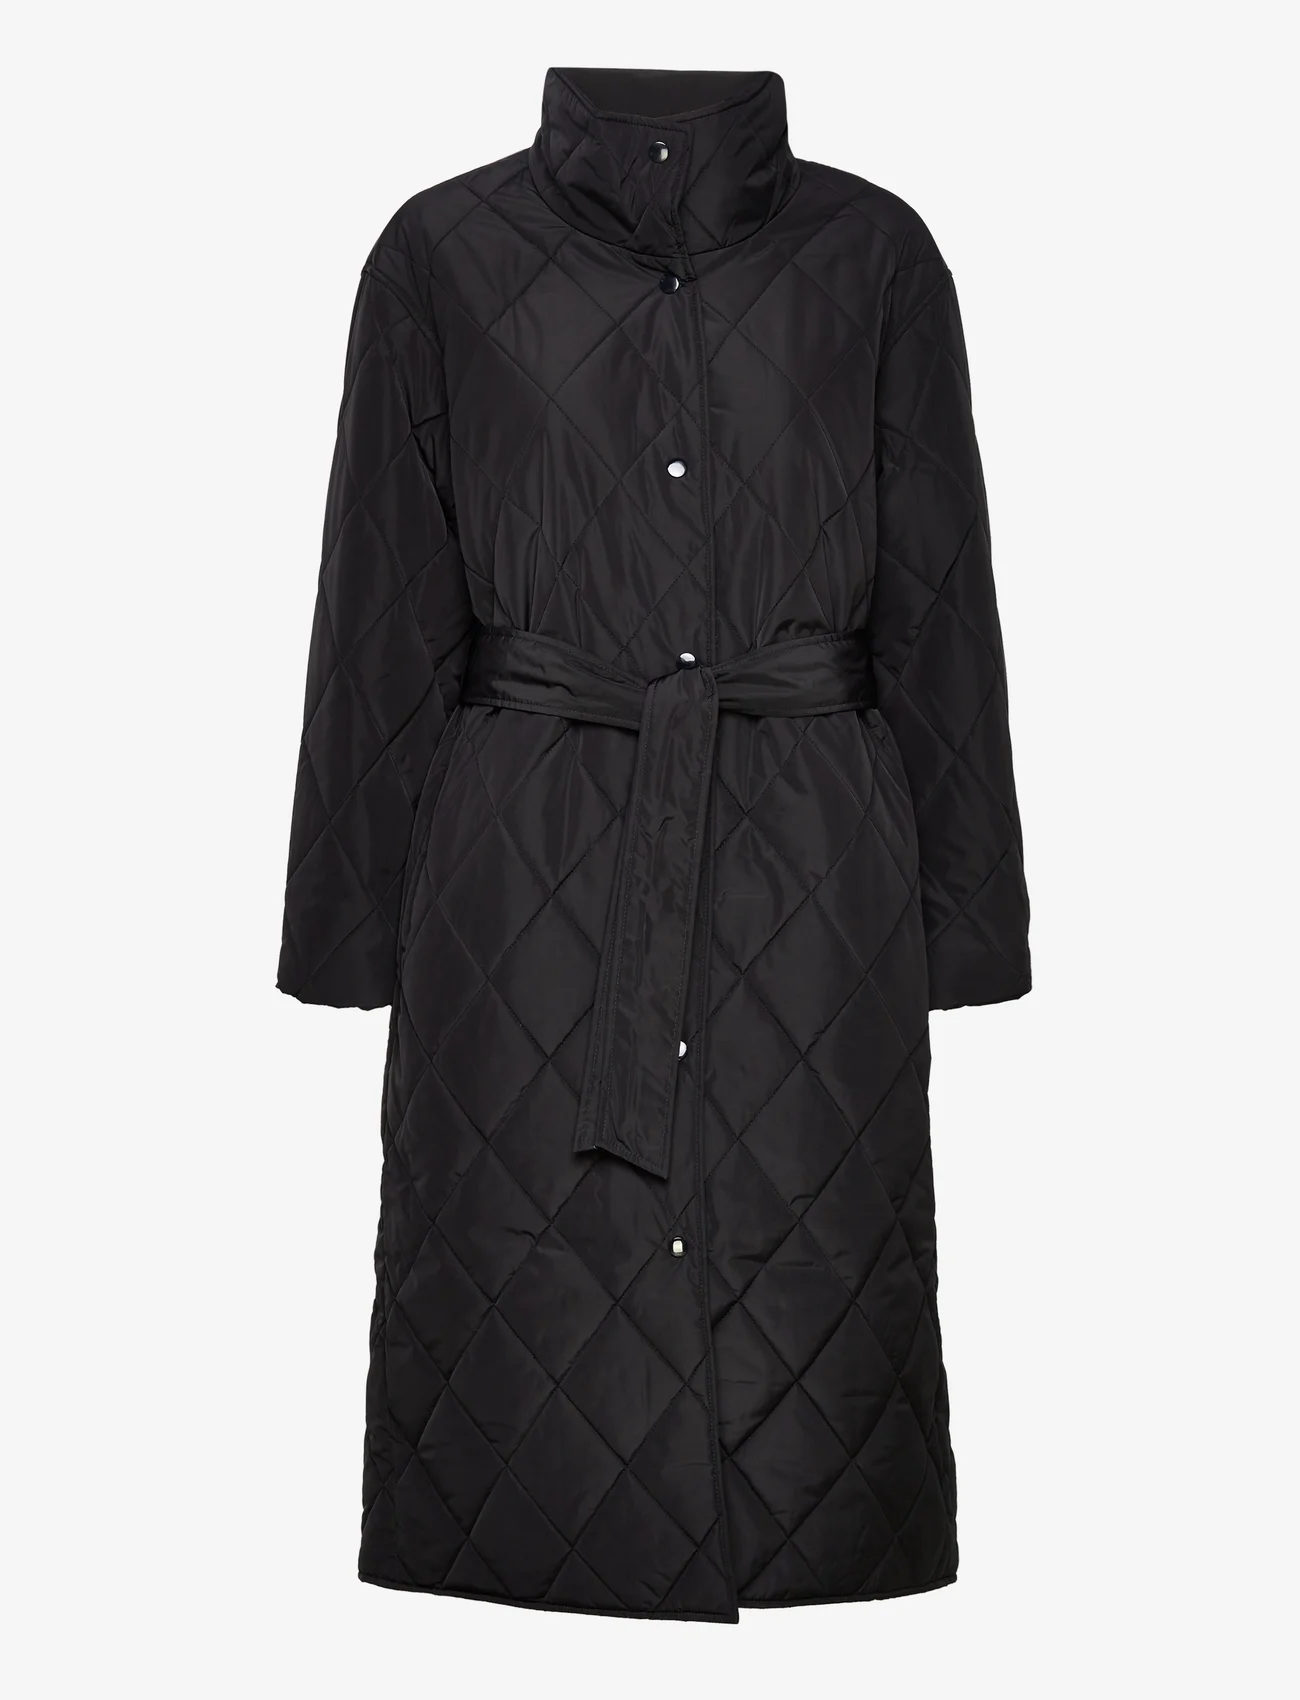 GANT - D1. QUILTED COAT - quilted jackets - ebony black - 0